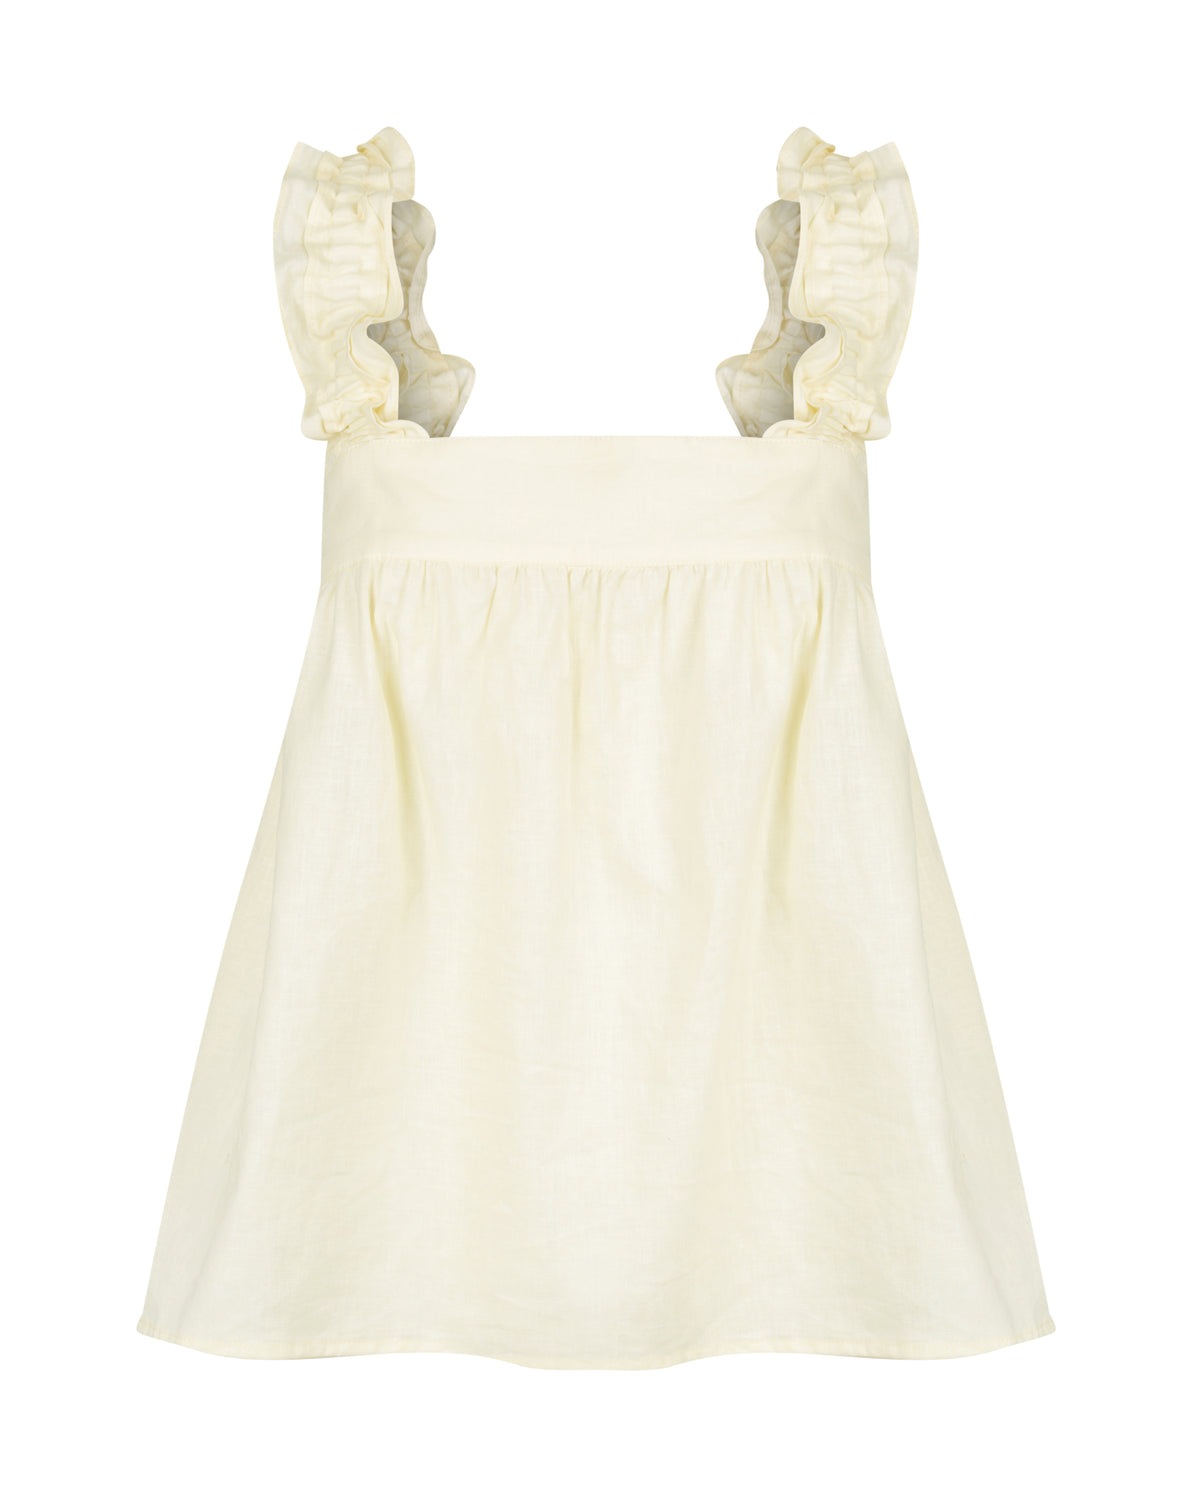 The Baby Doll Top